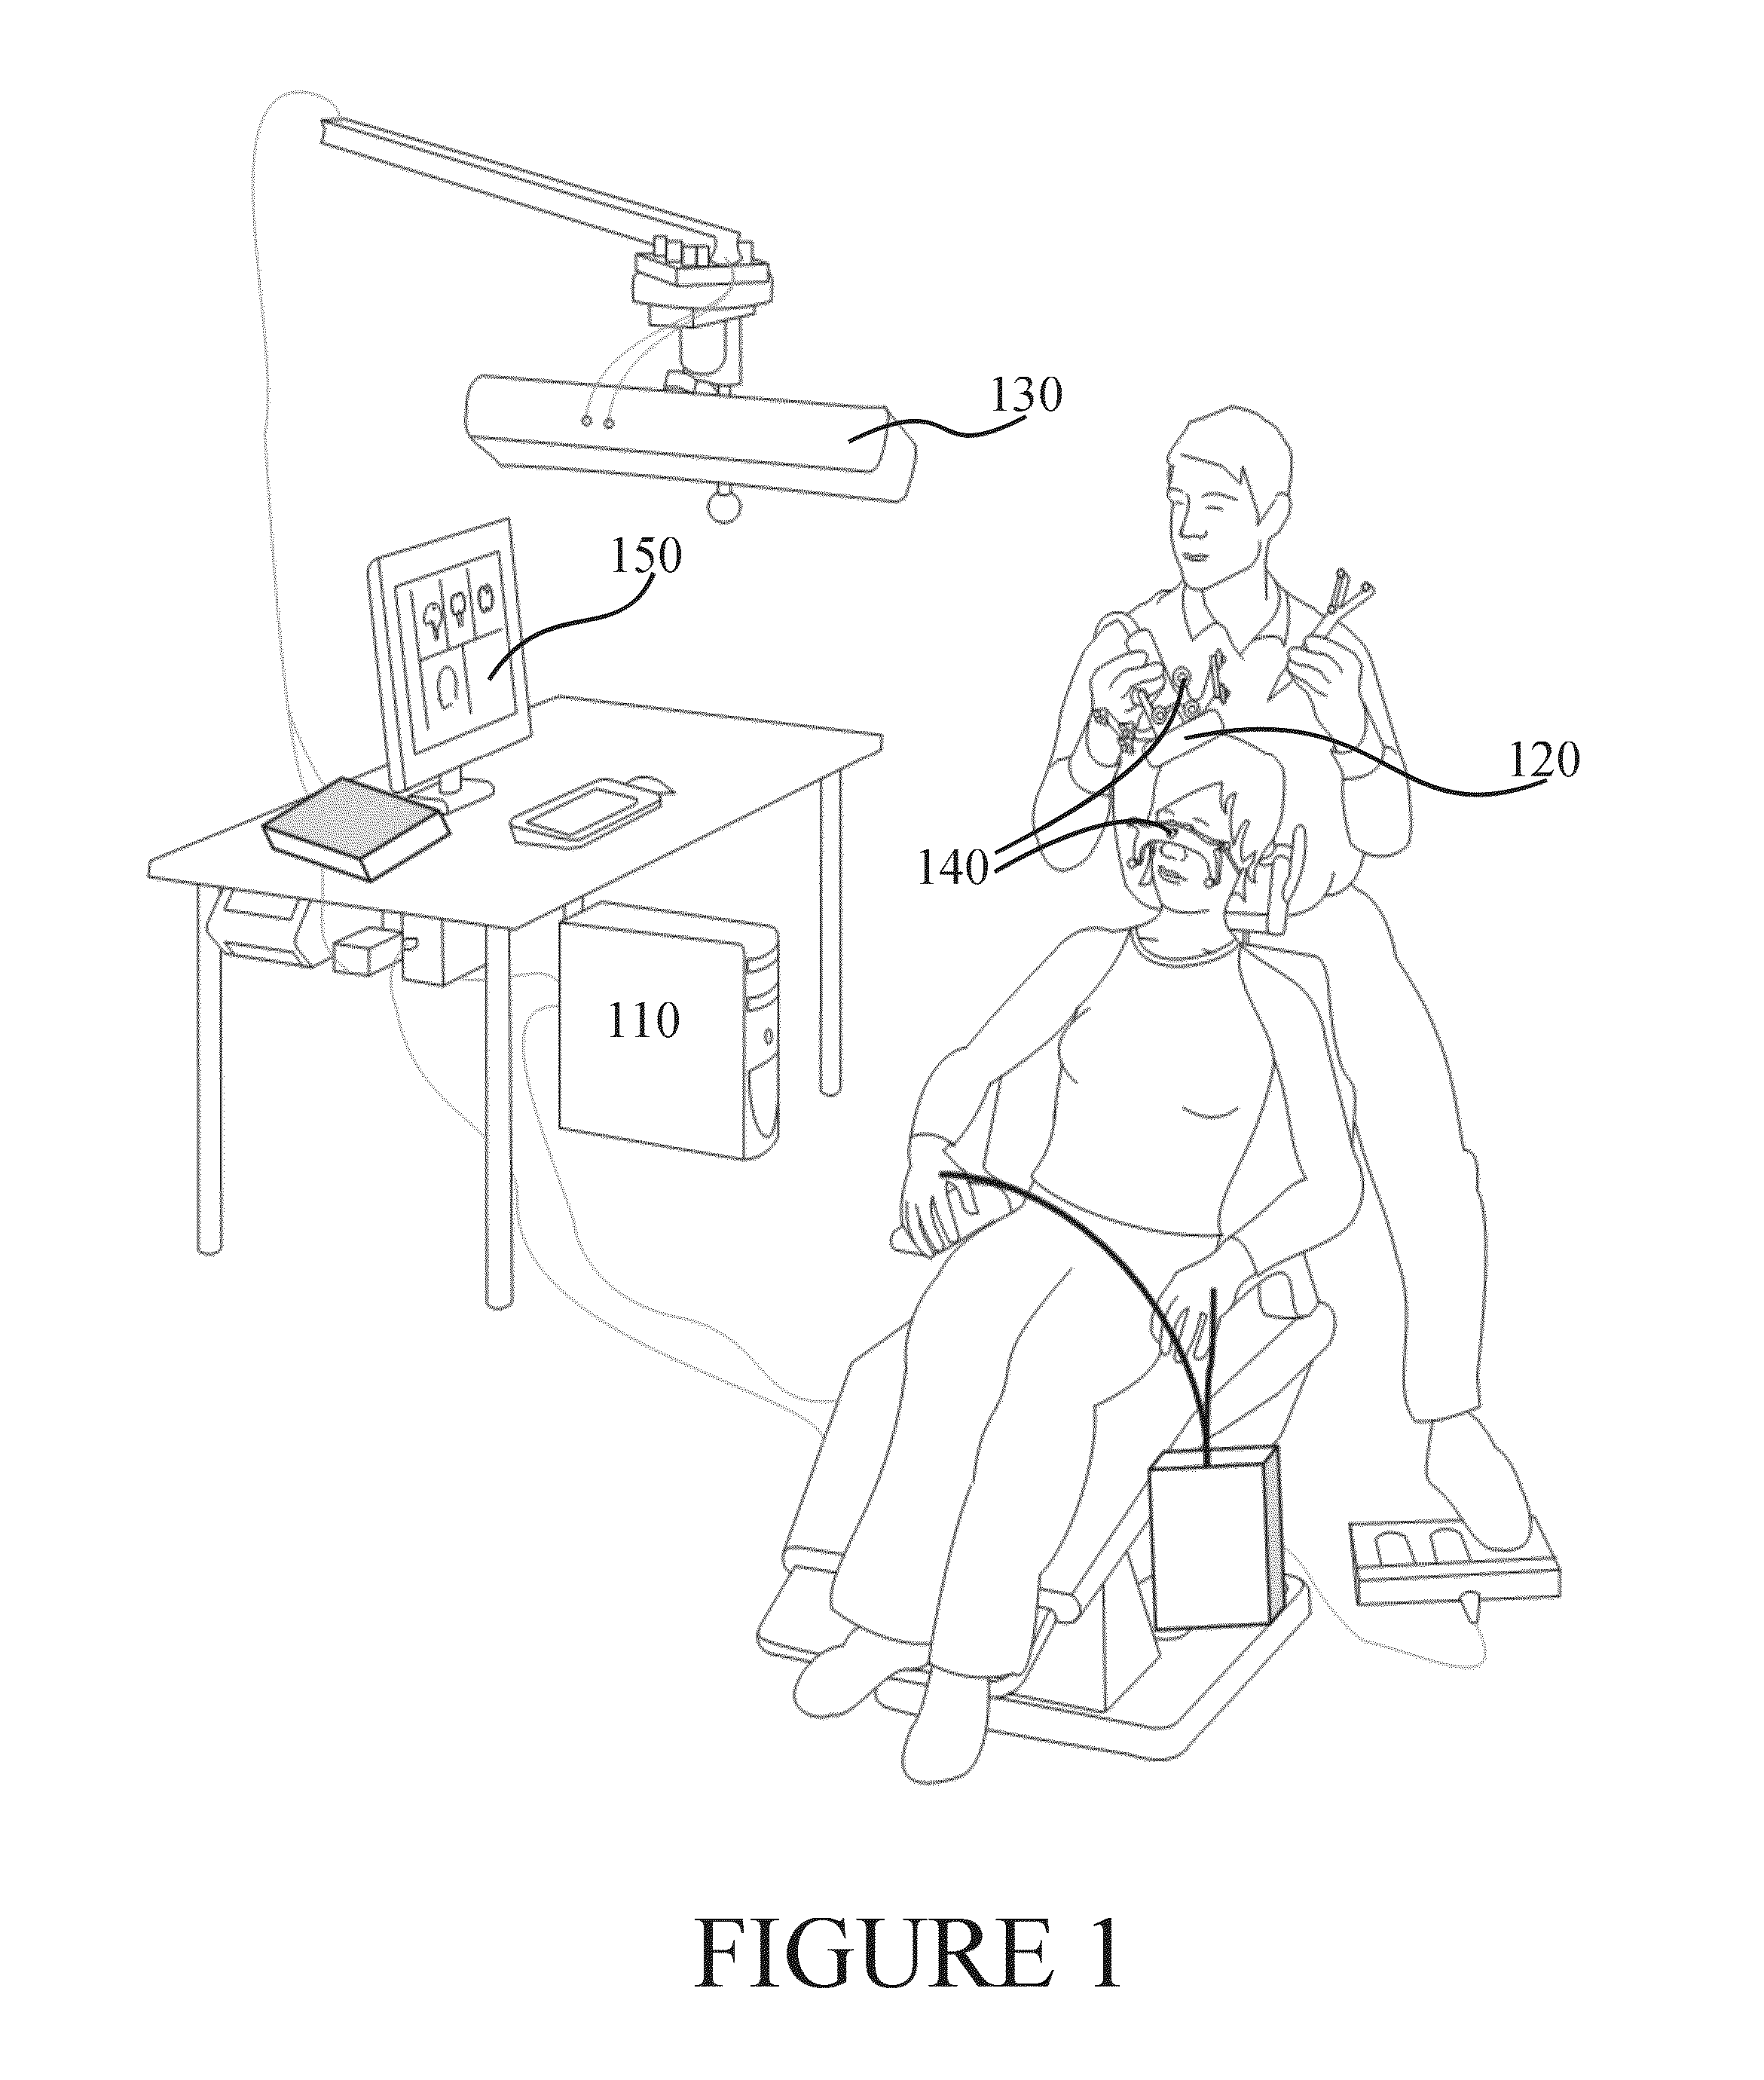 Position-finding apparatus